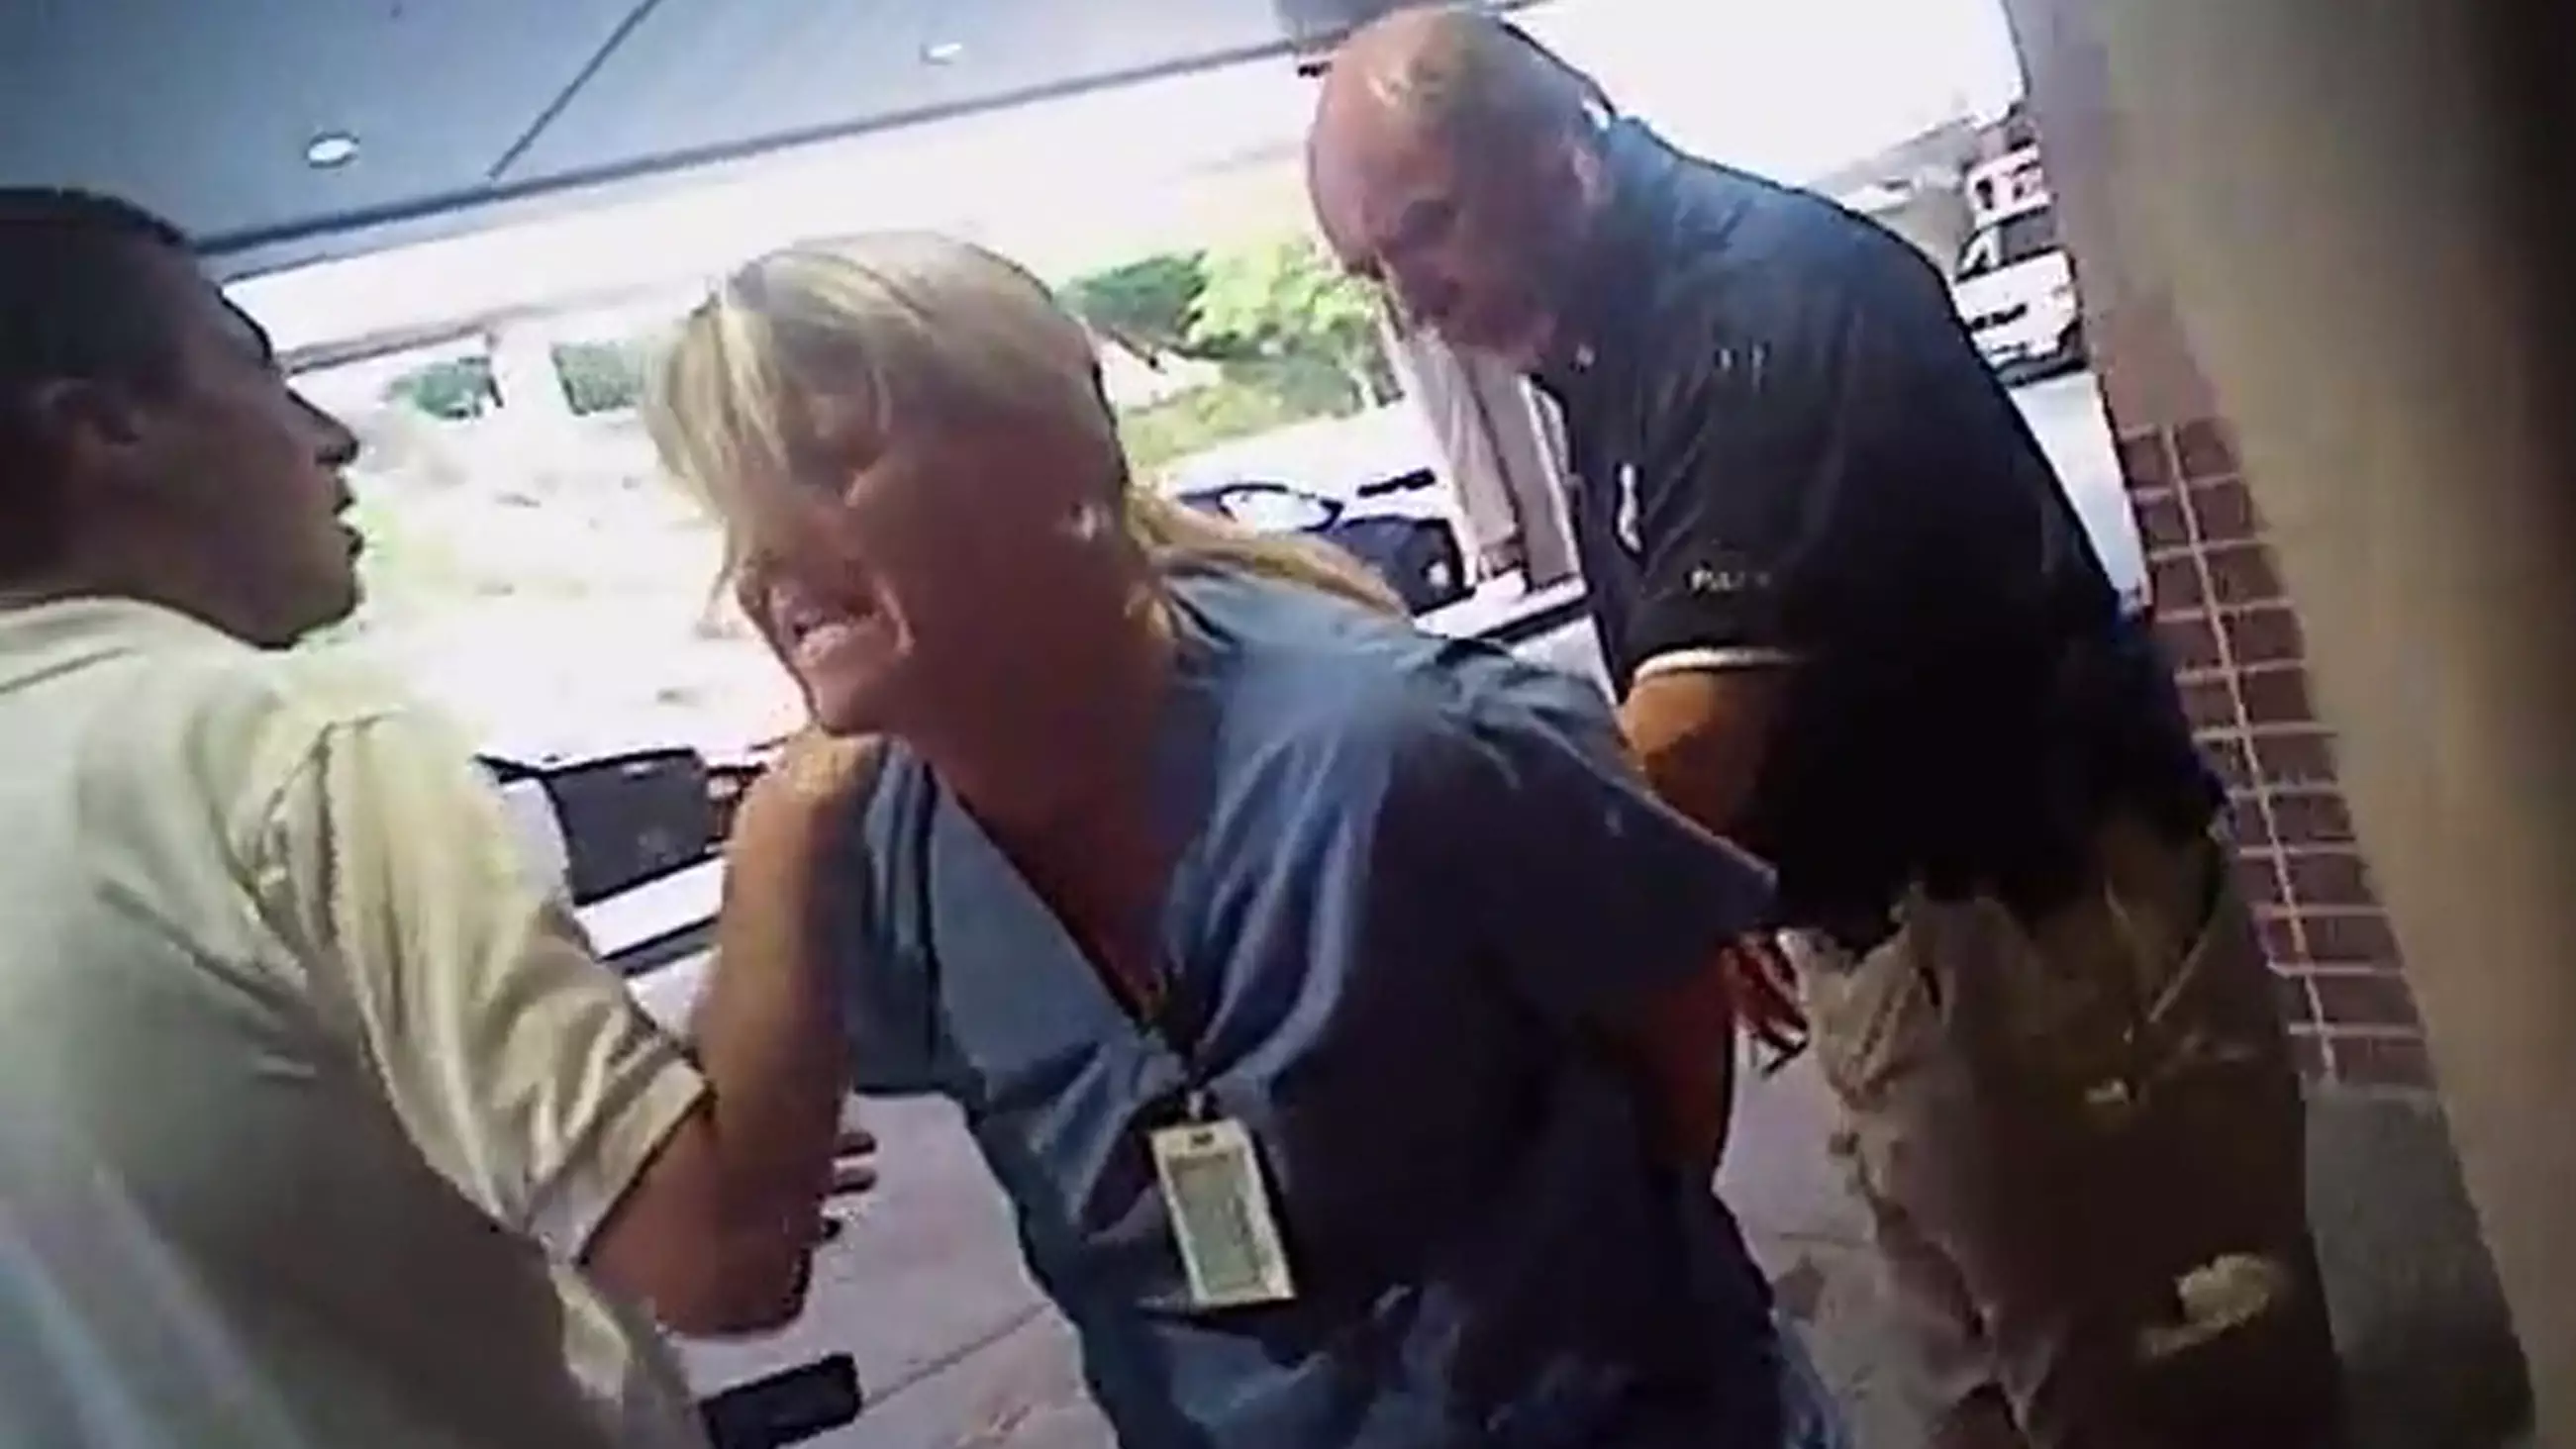 Nurse Who Was Dragged Out Of Hospital By Police Agrees Settlement Payout